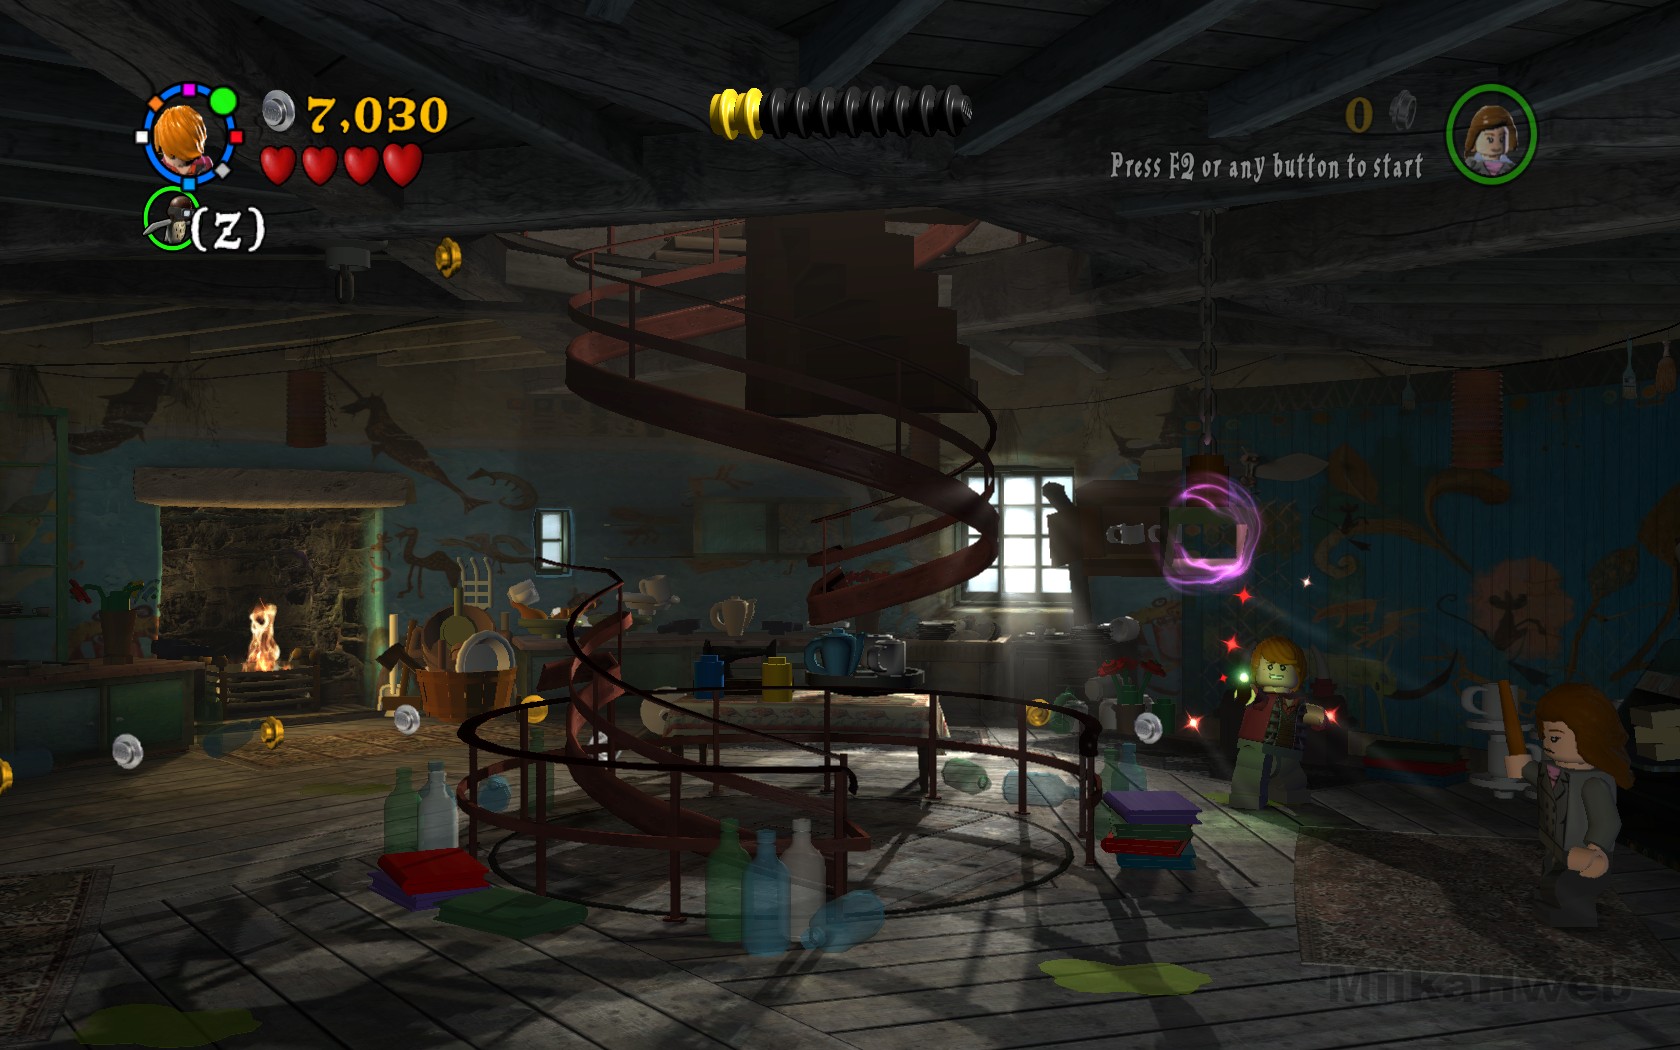 LEGO Harry Potter: Years 5-7 System Requirements